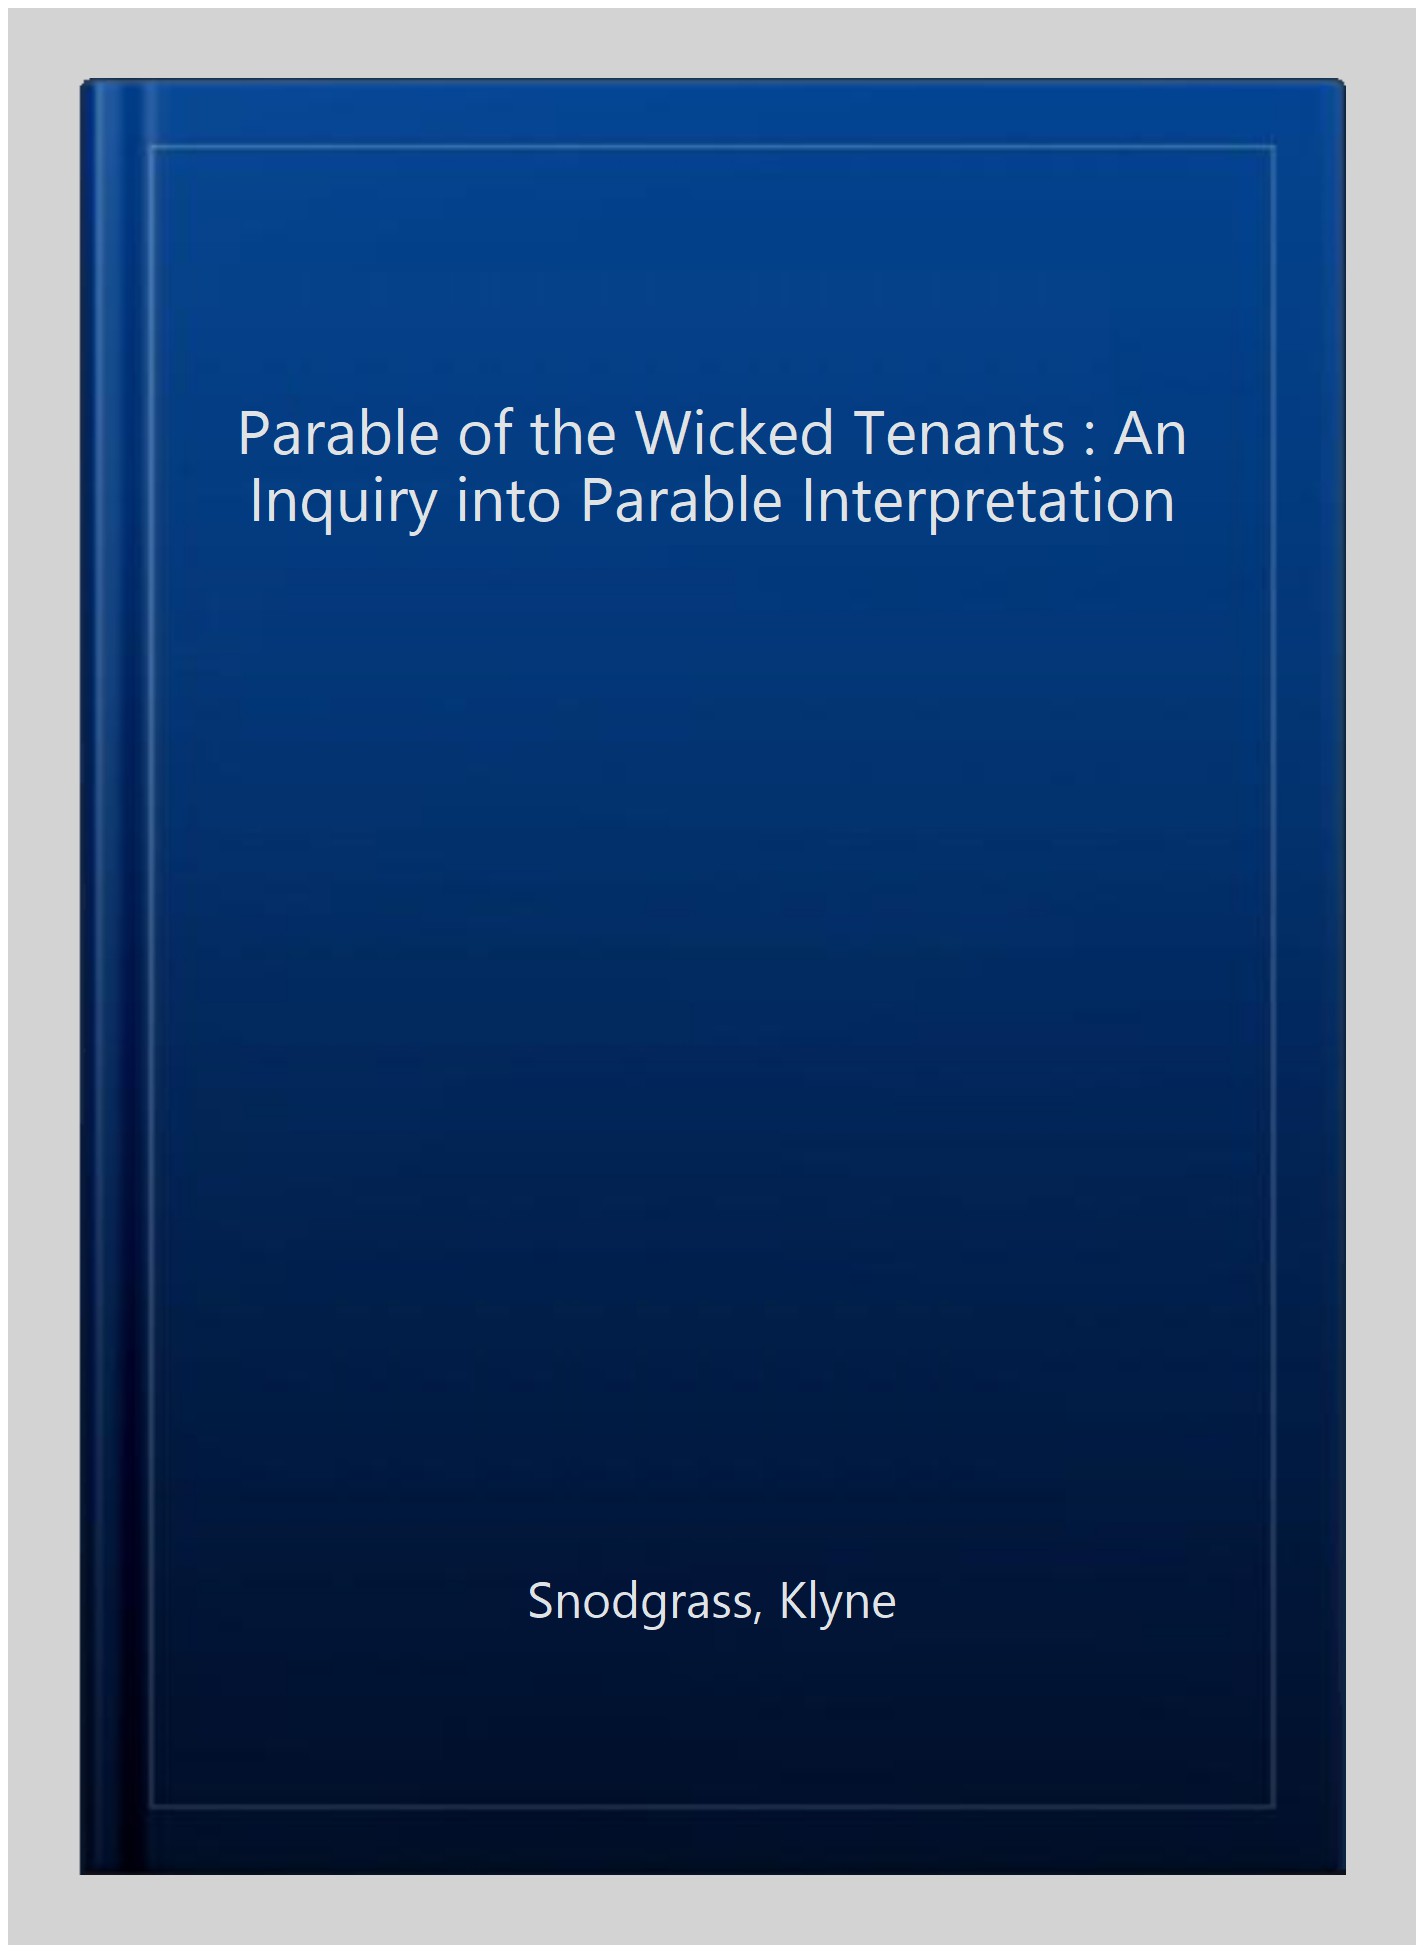 Parable of the Wicked Tenants : An Inquiry into Parable Interpretation - Snodgrass, Klyne